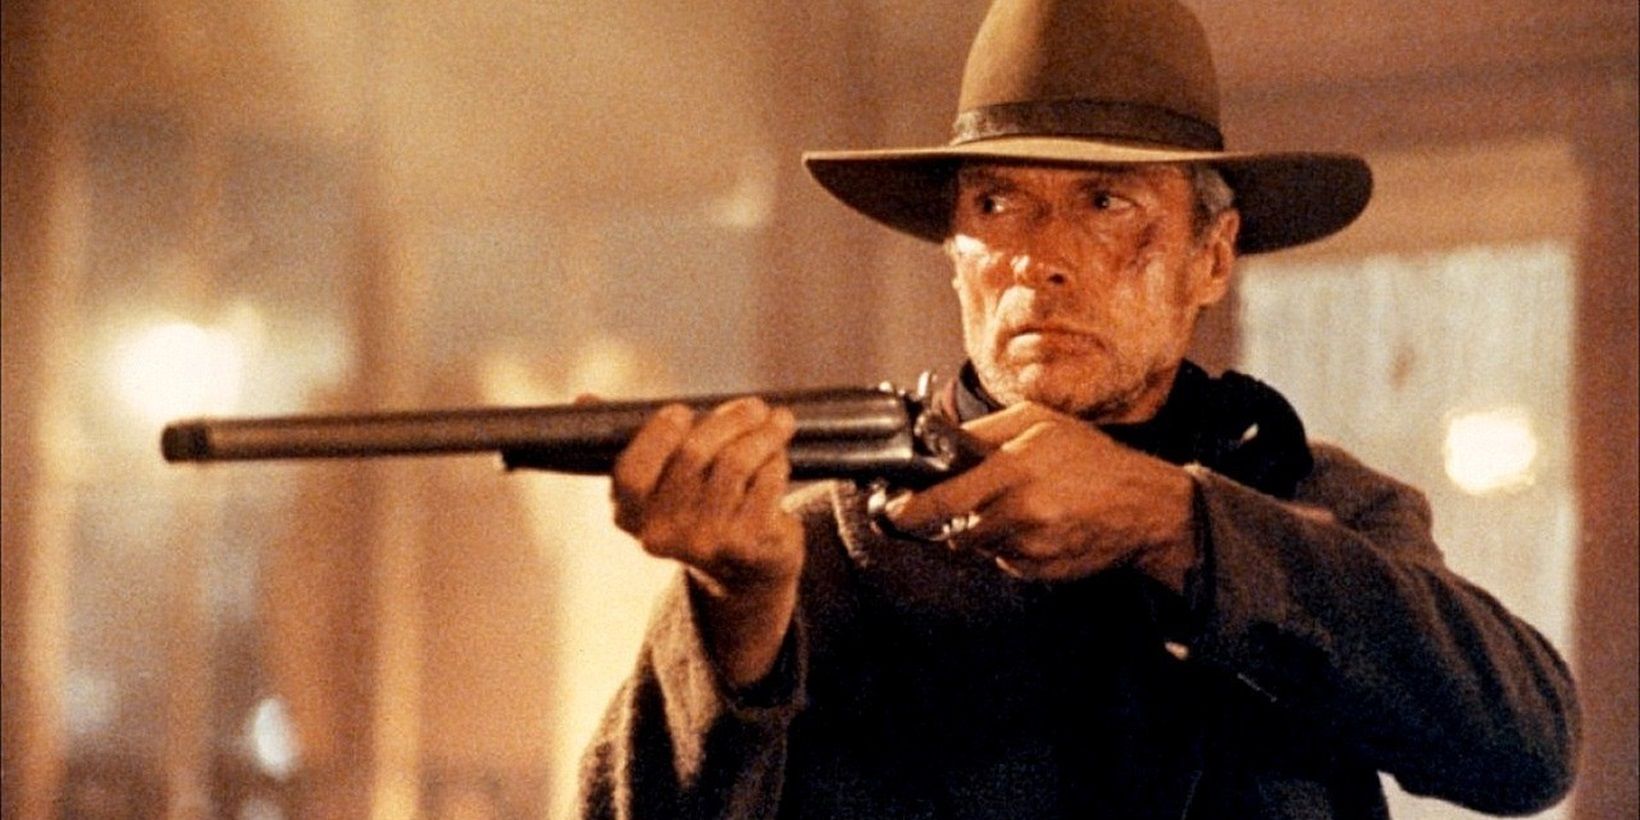 Clint Eastwood as Will Munny holding up a rifle in Unforgiven